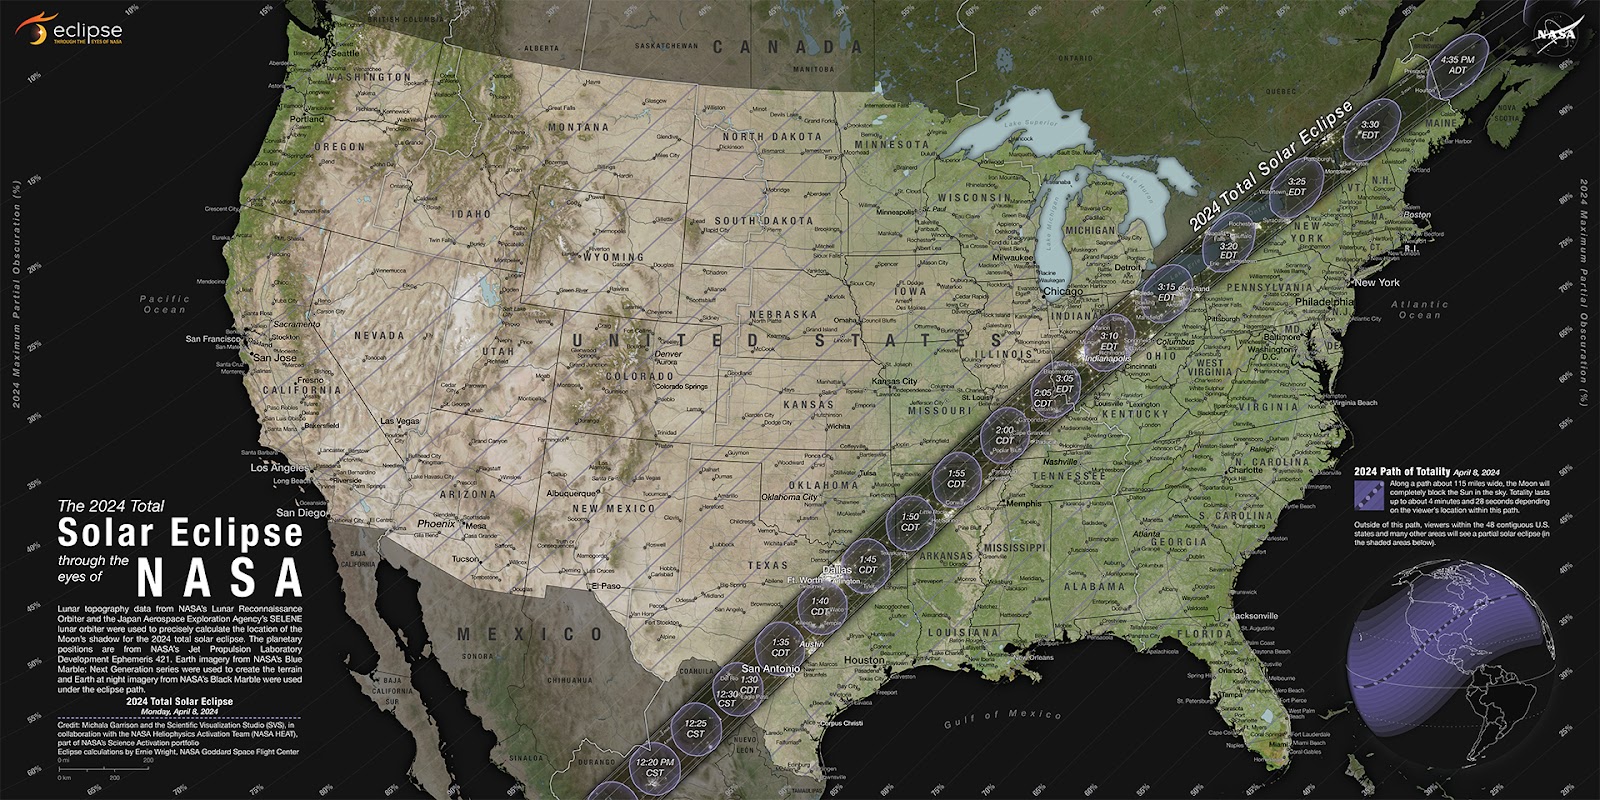 Solar Eclipse 2024 path of totality